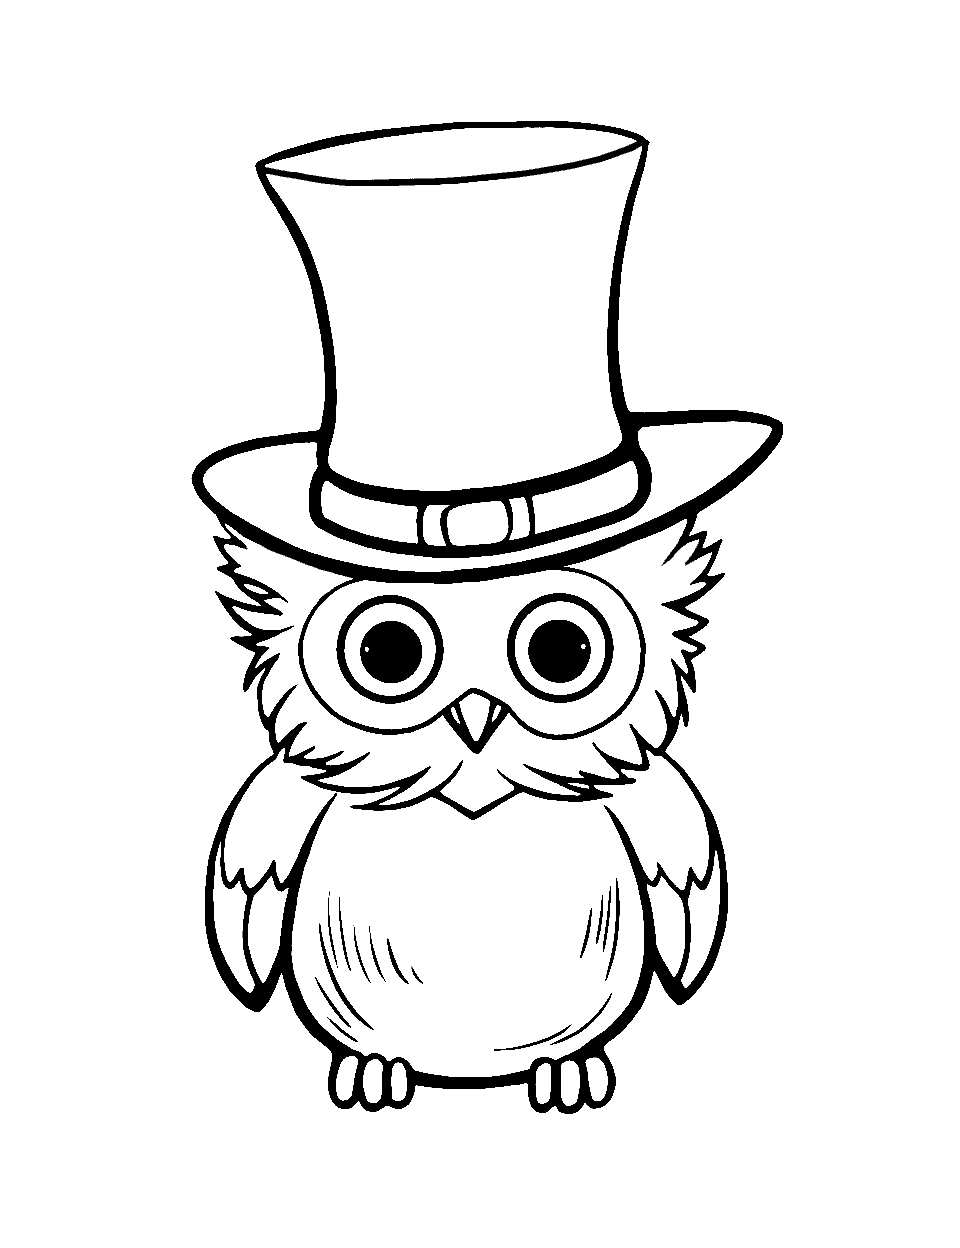 Owl with Leprechaun Hat Coloring Page - An owl wearing a leprechaun hat.